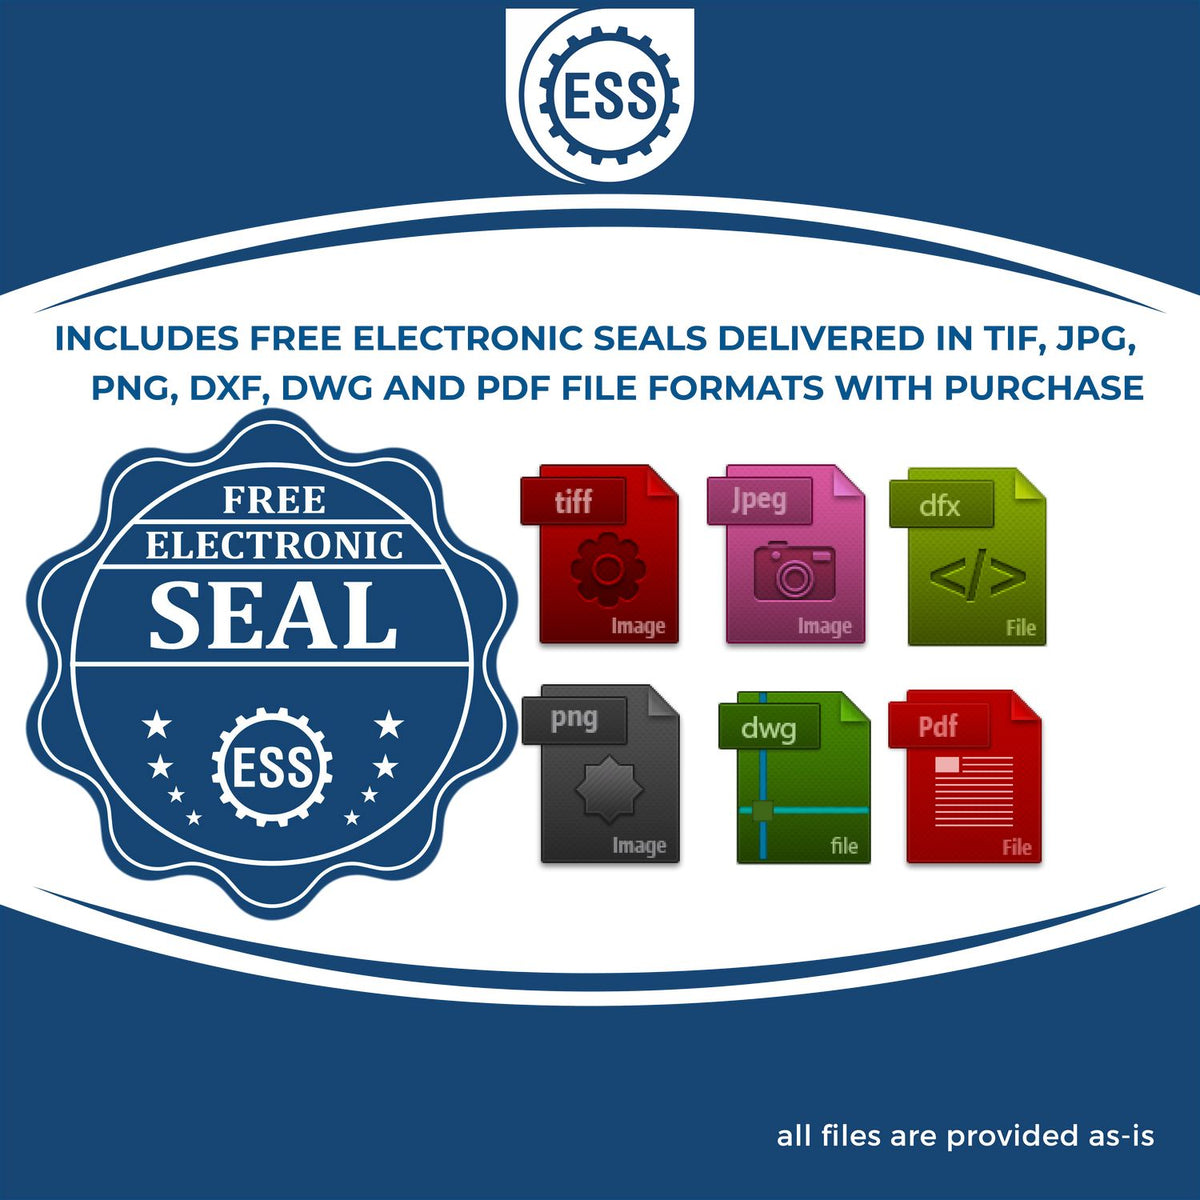 An infographic for the free electronic seal for the Premium MaxLight Pre-Inked Wyoming Landscape Architectural Stamp illustrating the different file type icons such as DXF, DWG, TIF, JPG and PNG.